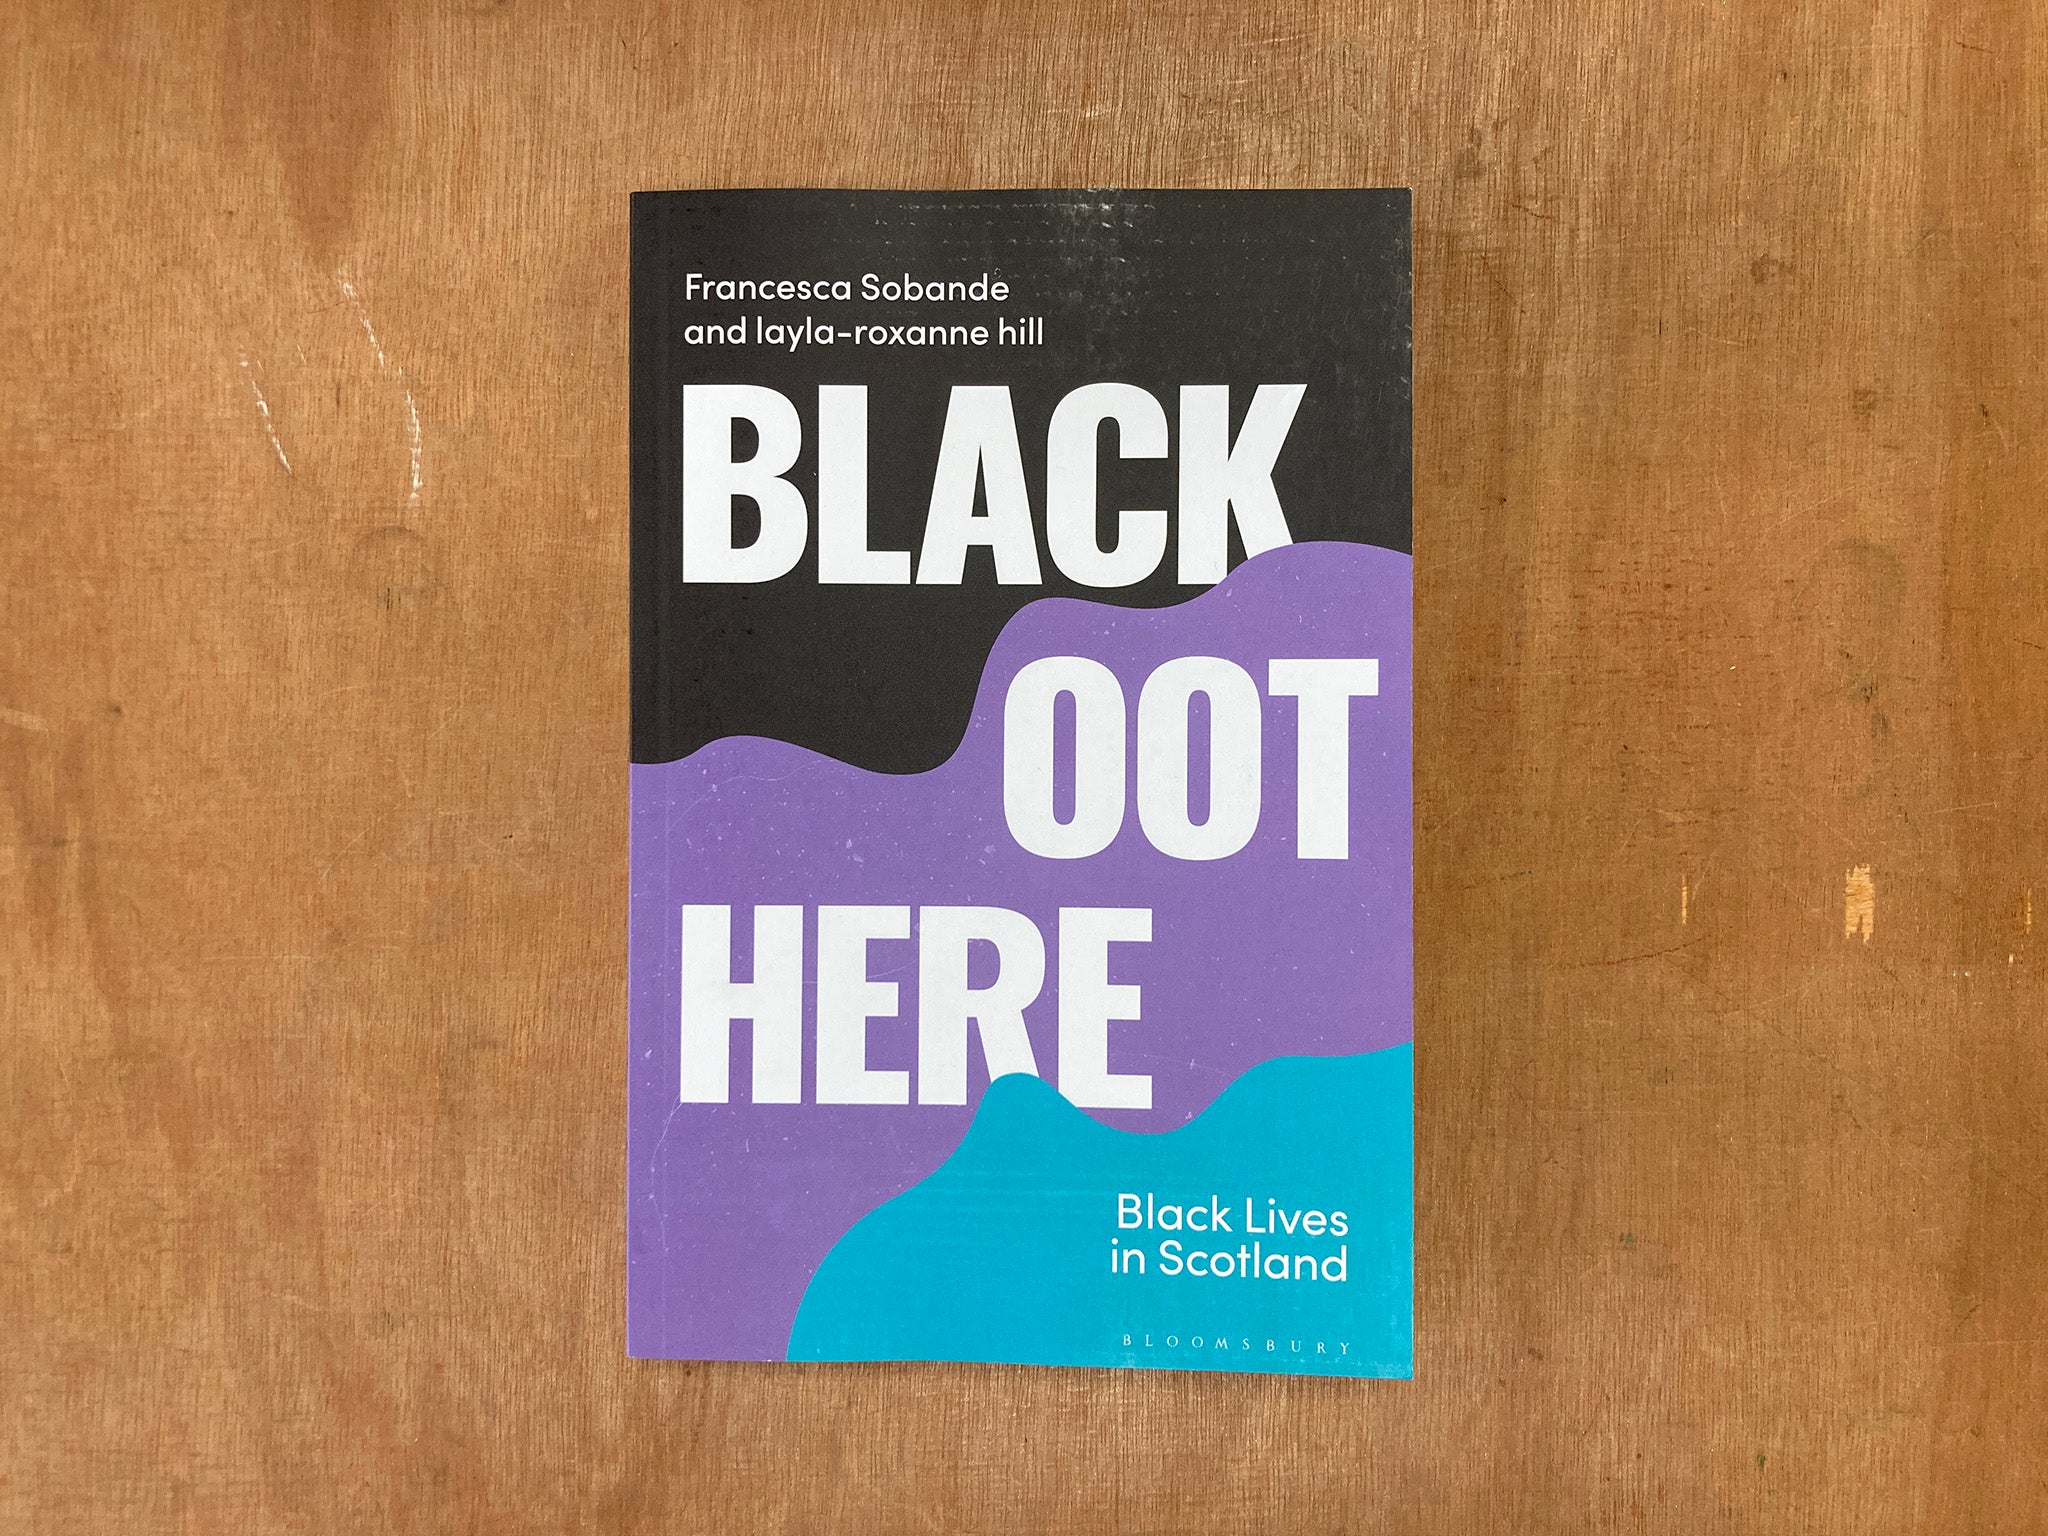 BLACK OOT HERE: BLACK LIVES IN SCOTLAND by Francesca Sobande and layla-roxanne hill